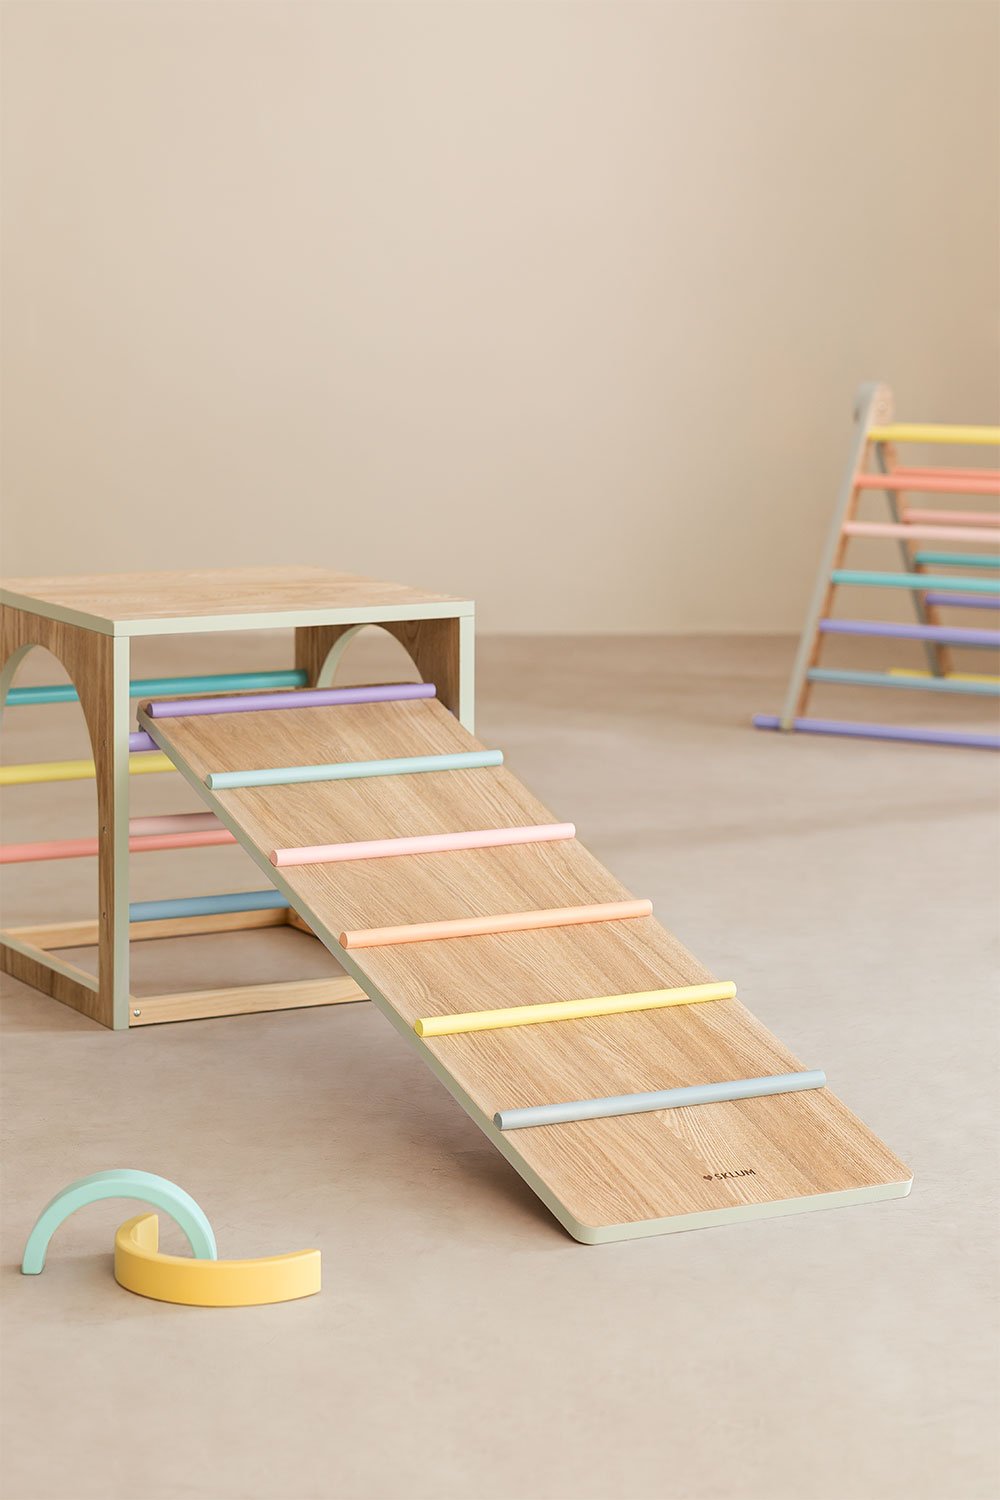 Learning Ladder Ramp Pyqer Colors Kids , gallery image 1